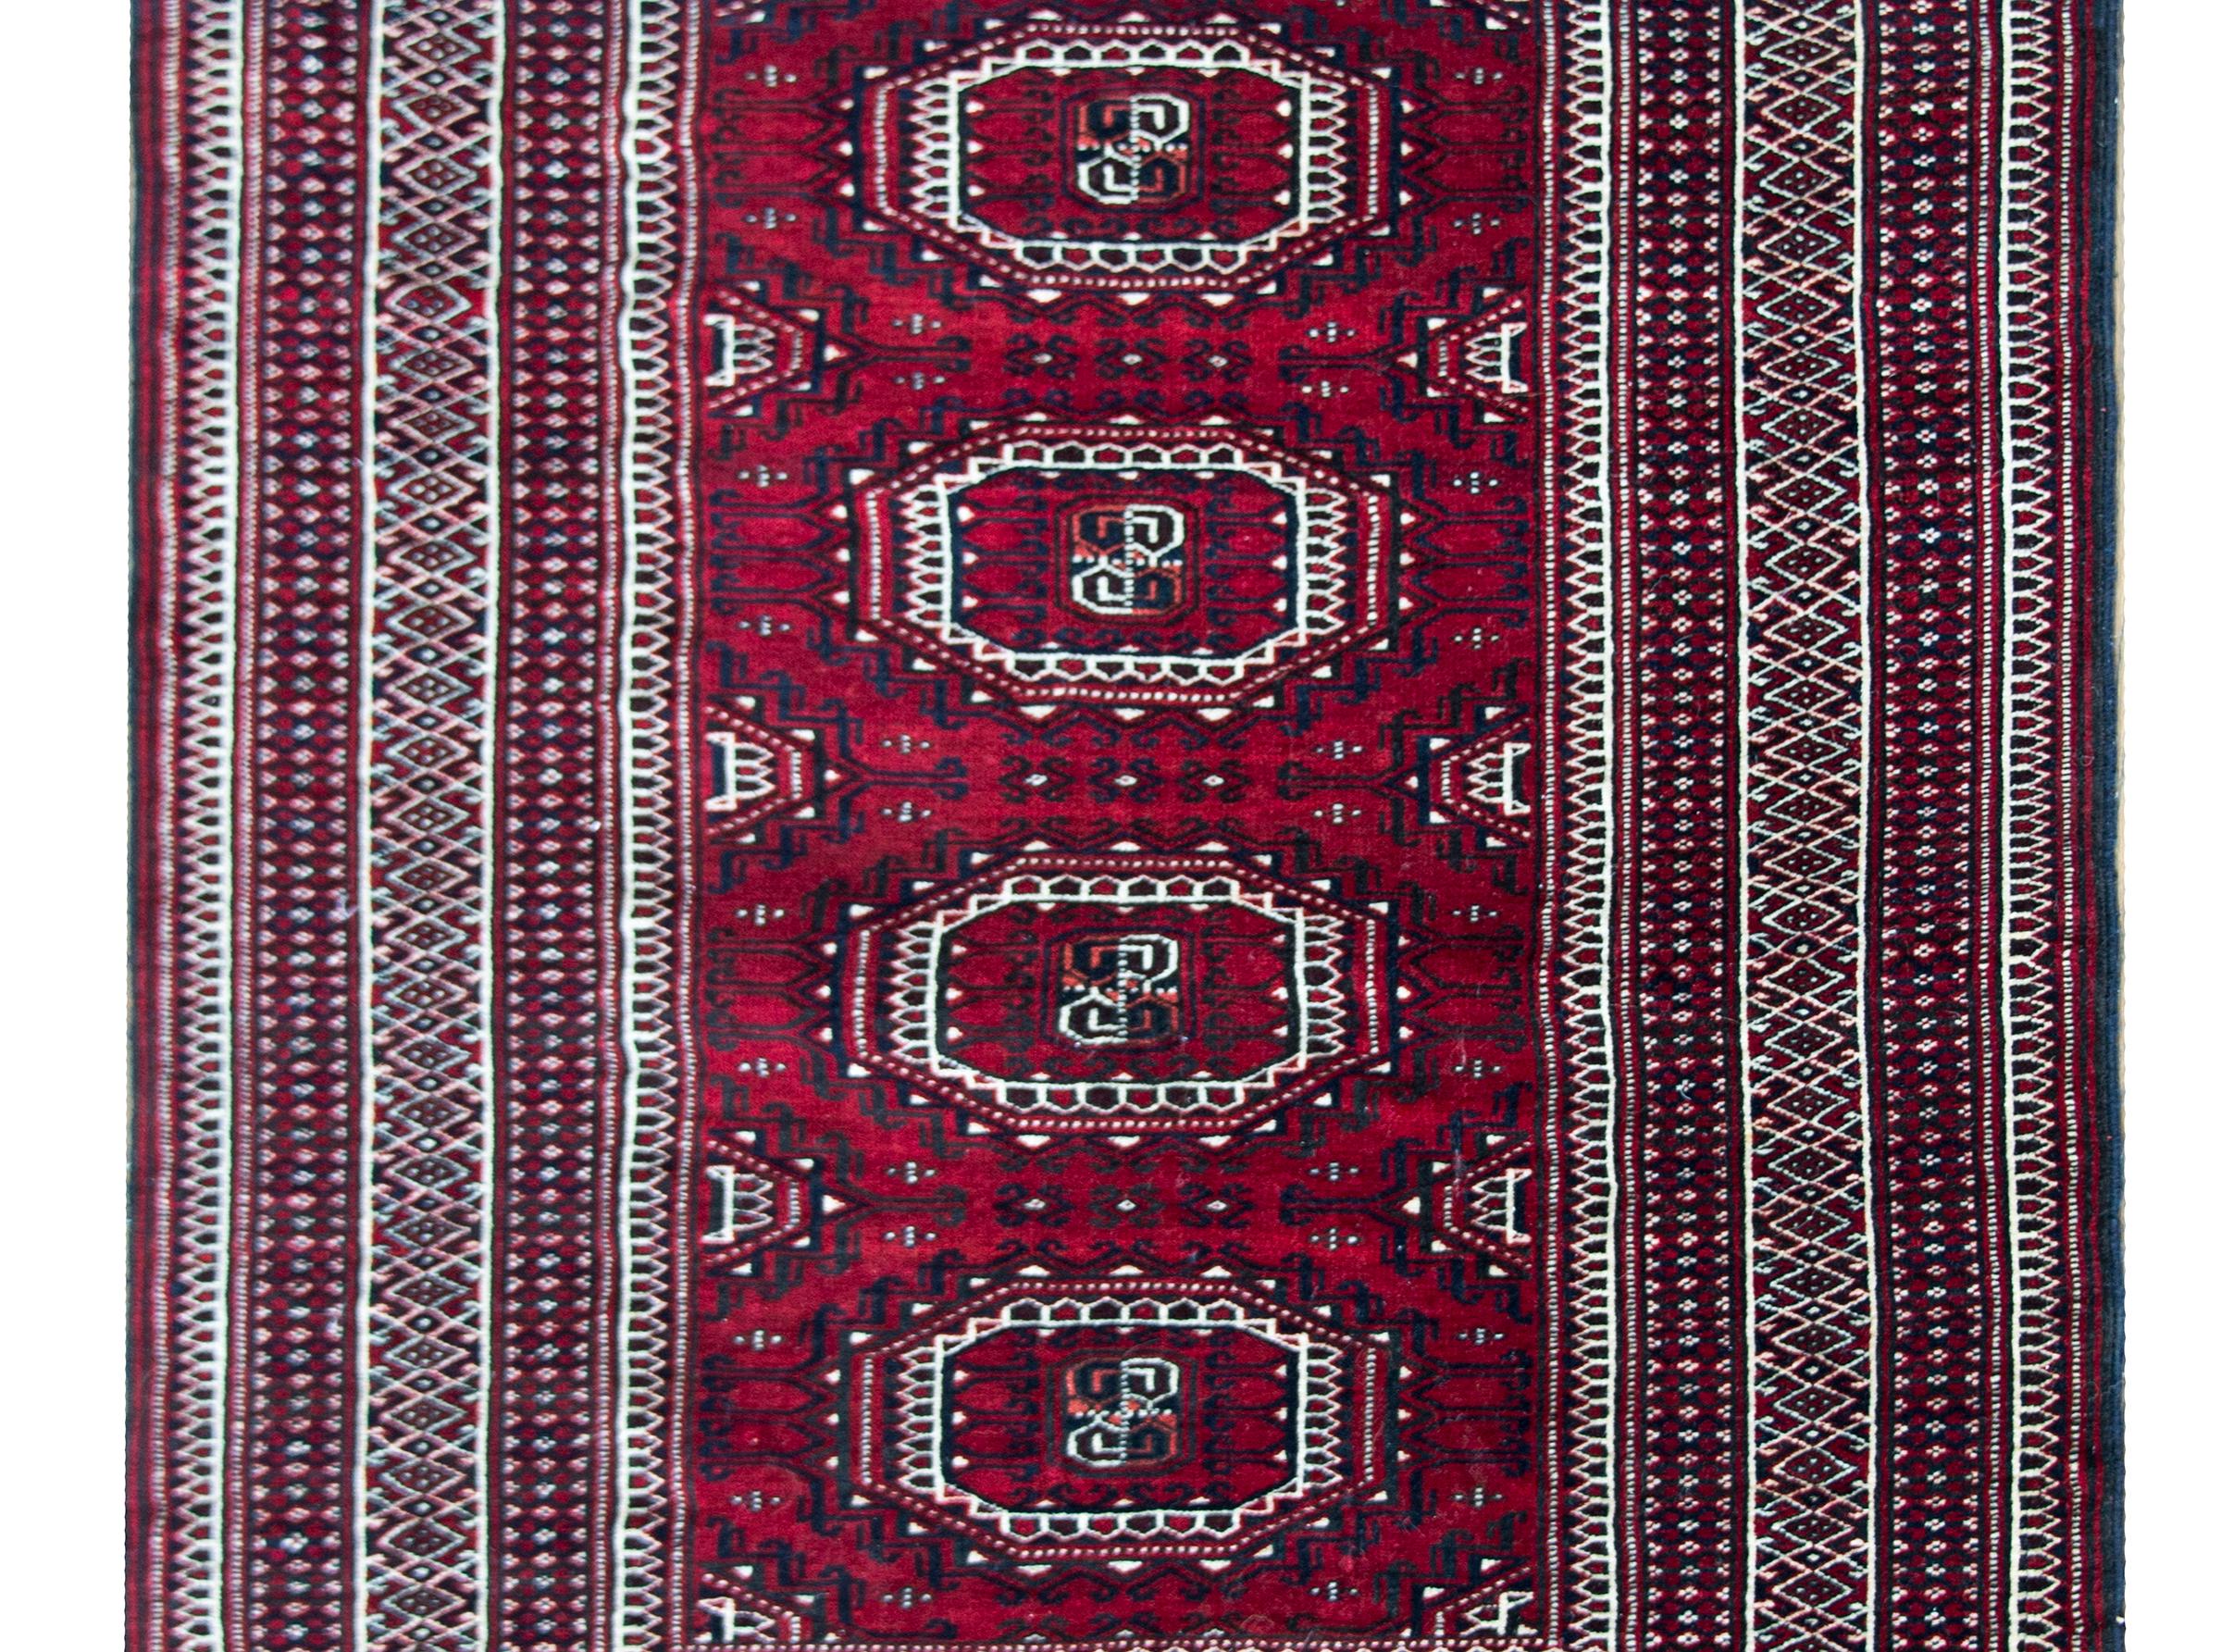 A beautiful late 20th century Persian Bokhara Turkman rug with four large central medallions surrounded by myriad stylized flowers and all surrounded by the most complex border containing dozens of petite floral patterned stripes, and all woven in